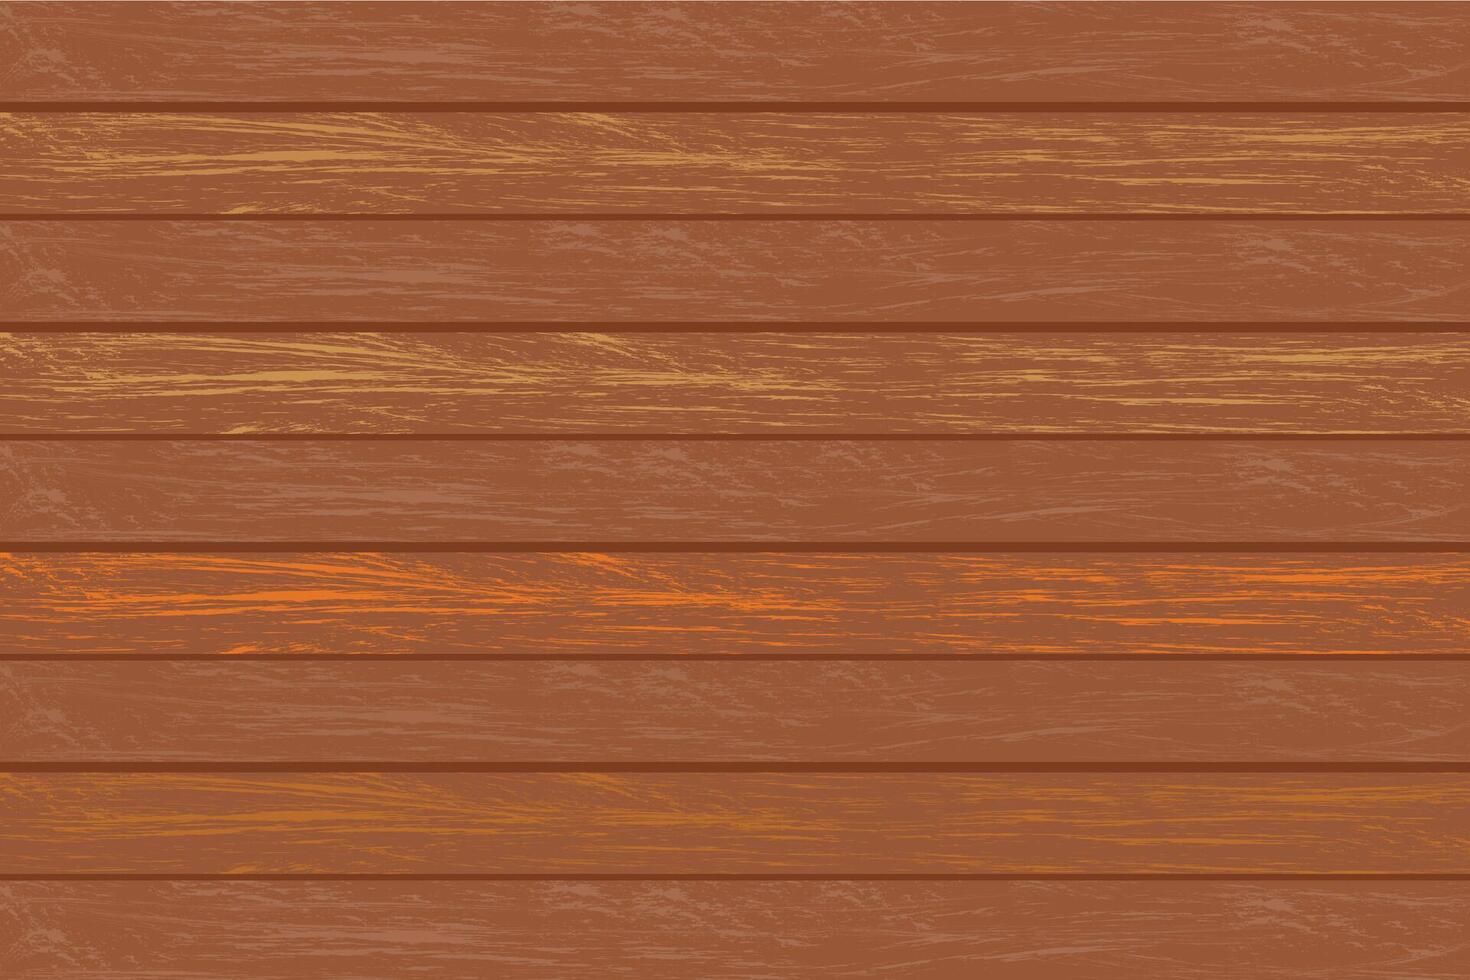 Wooden texture pattern seamless background. Wooden striped polywood Abstract. Parquet timber Beige wooden board. Grunge wood scratches Hardwood tiles wallpaper. Dense line Grain Bois Clapboard wall. vector